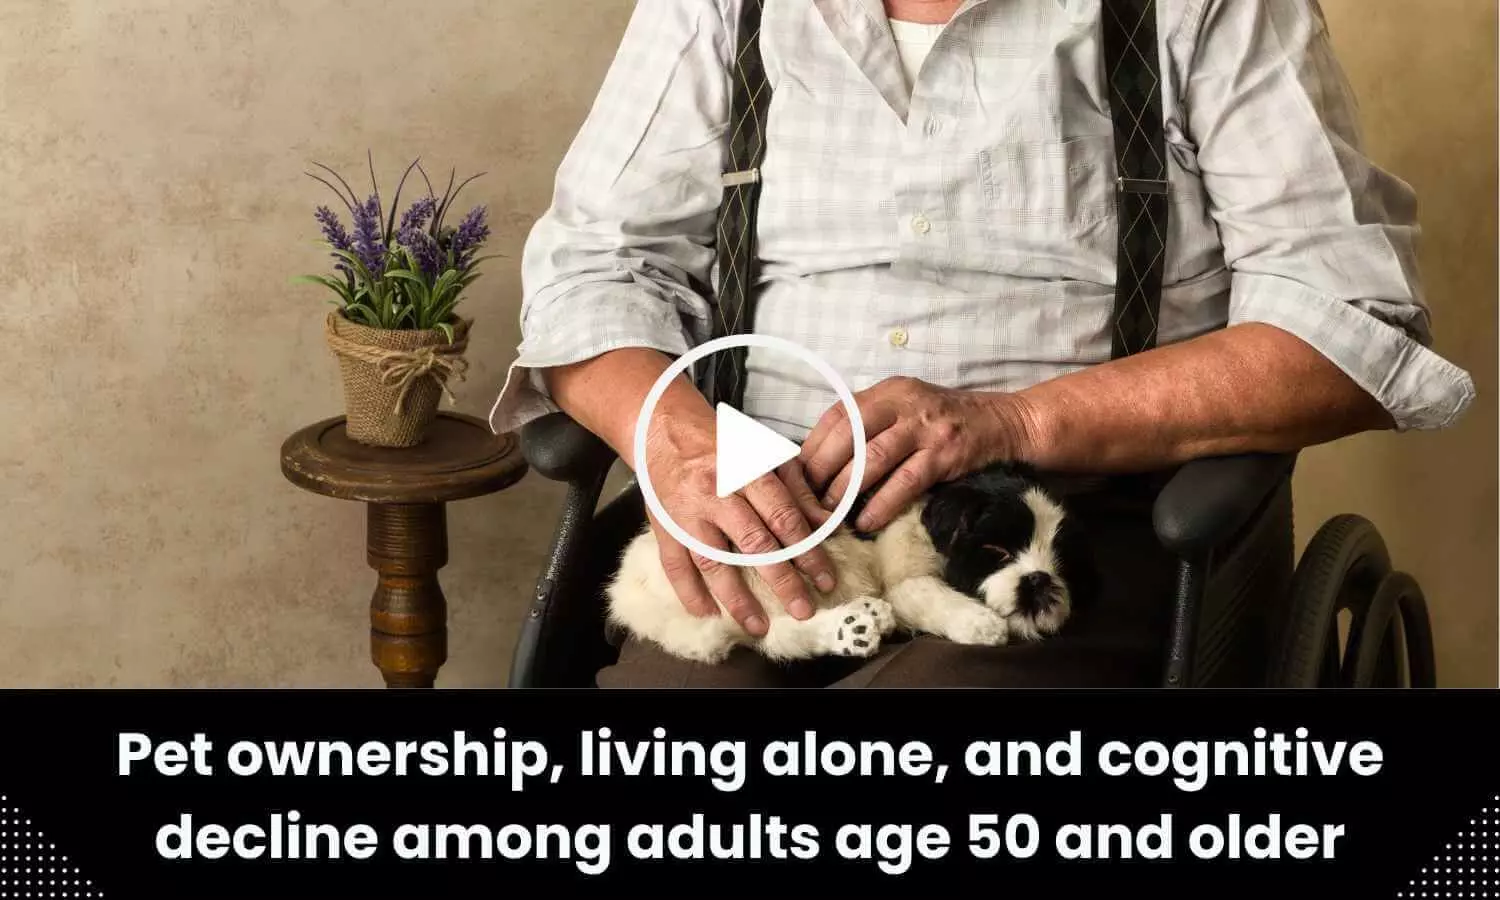 Pet ownership, living alone, and cognitive decline among adults age 50 and older